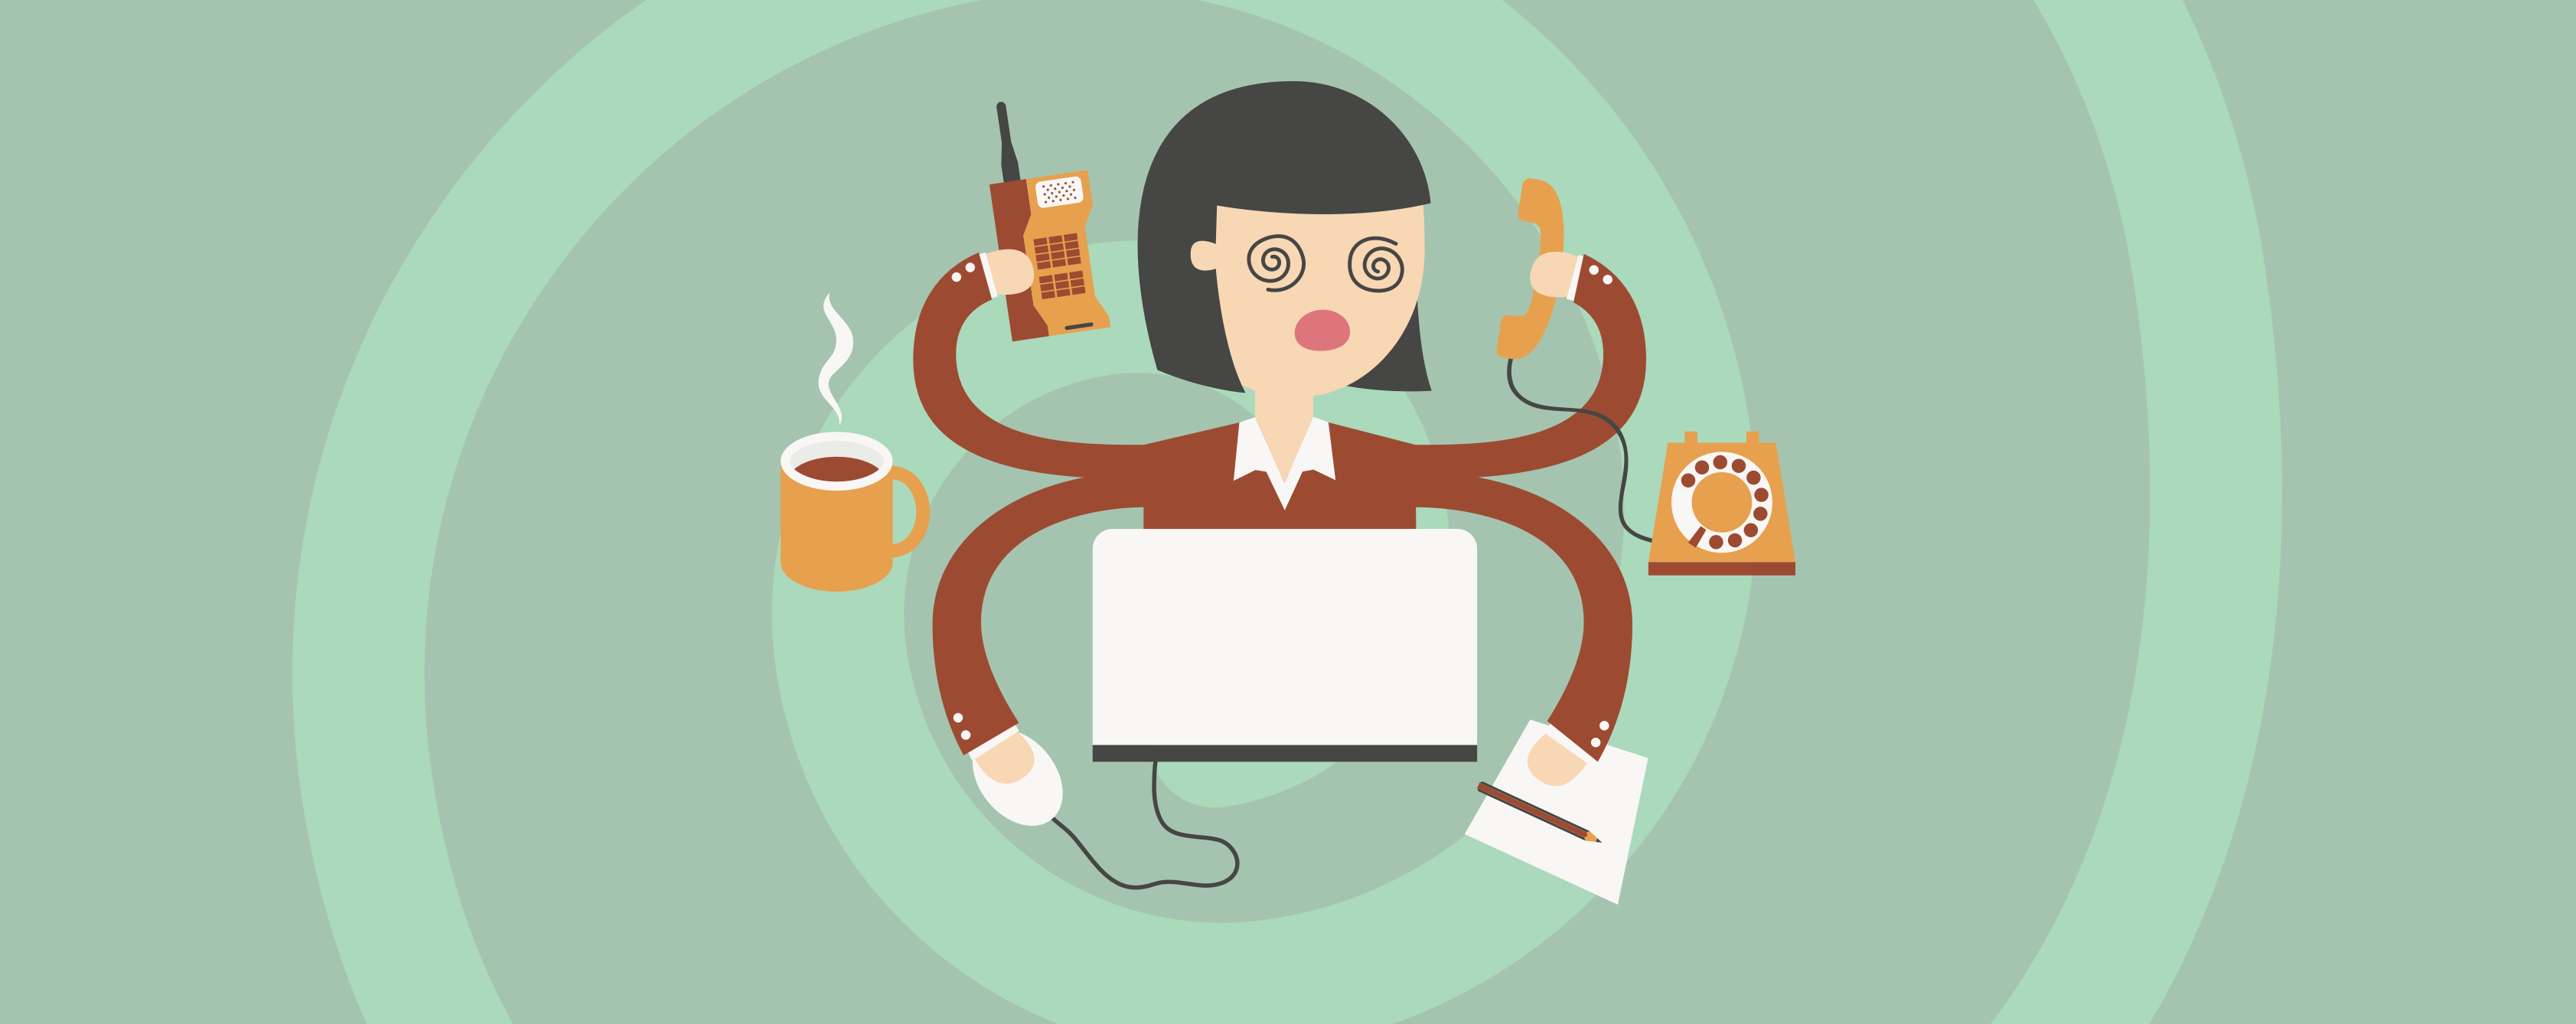 5 Signs Your Employees Are Overworked | When I Work